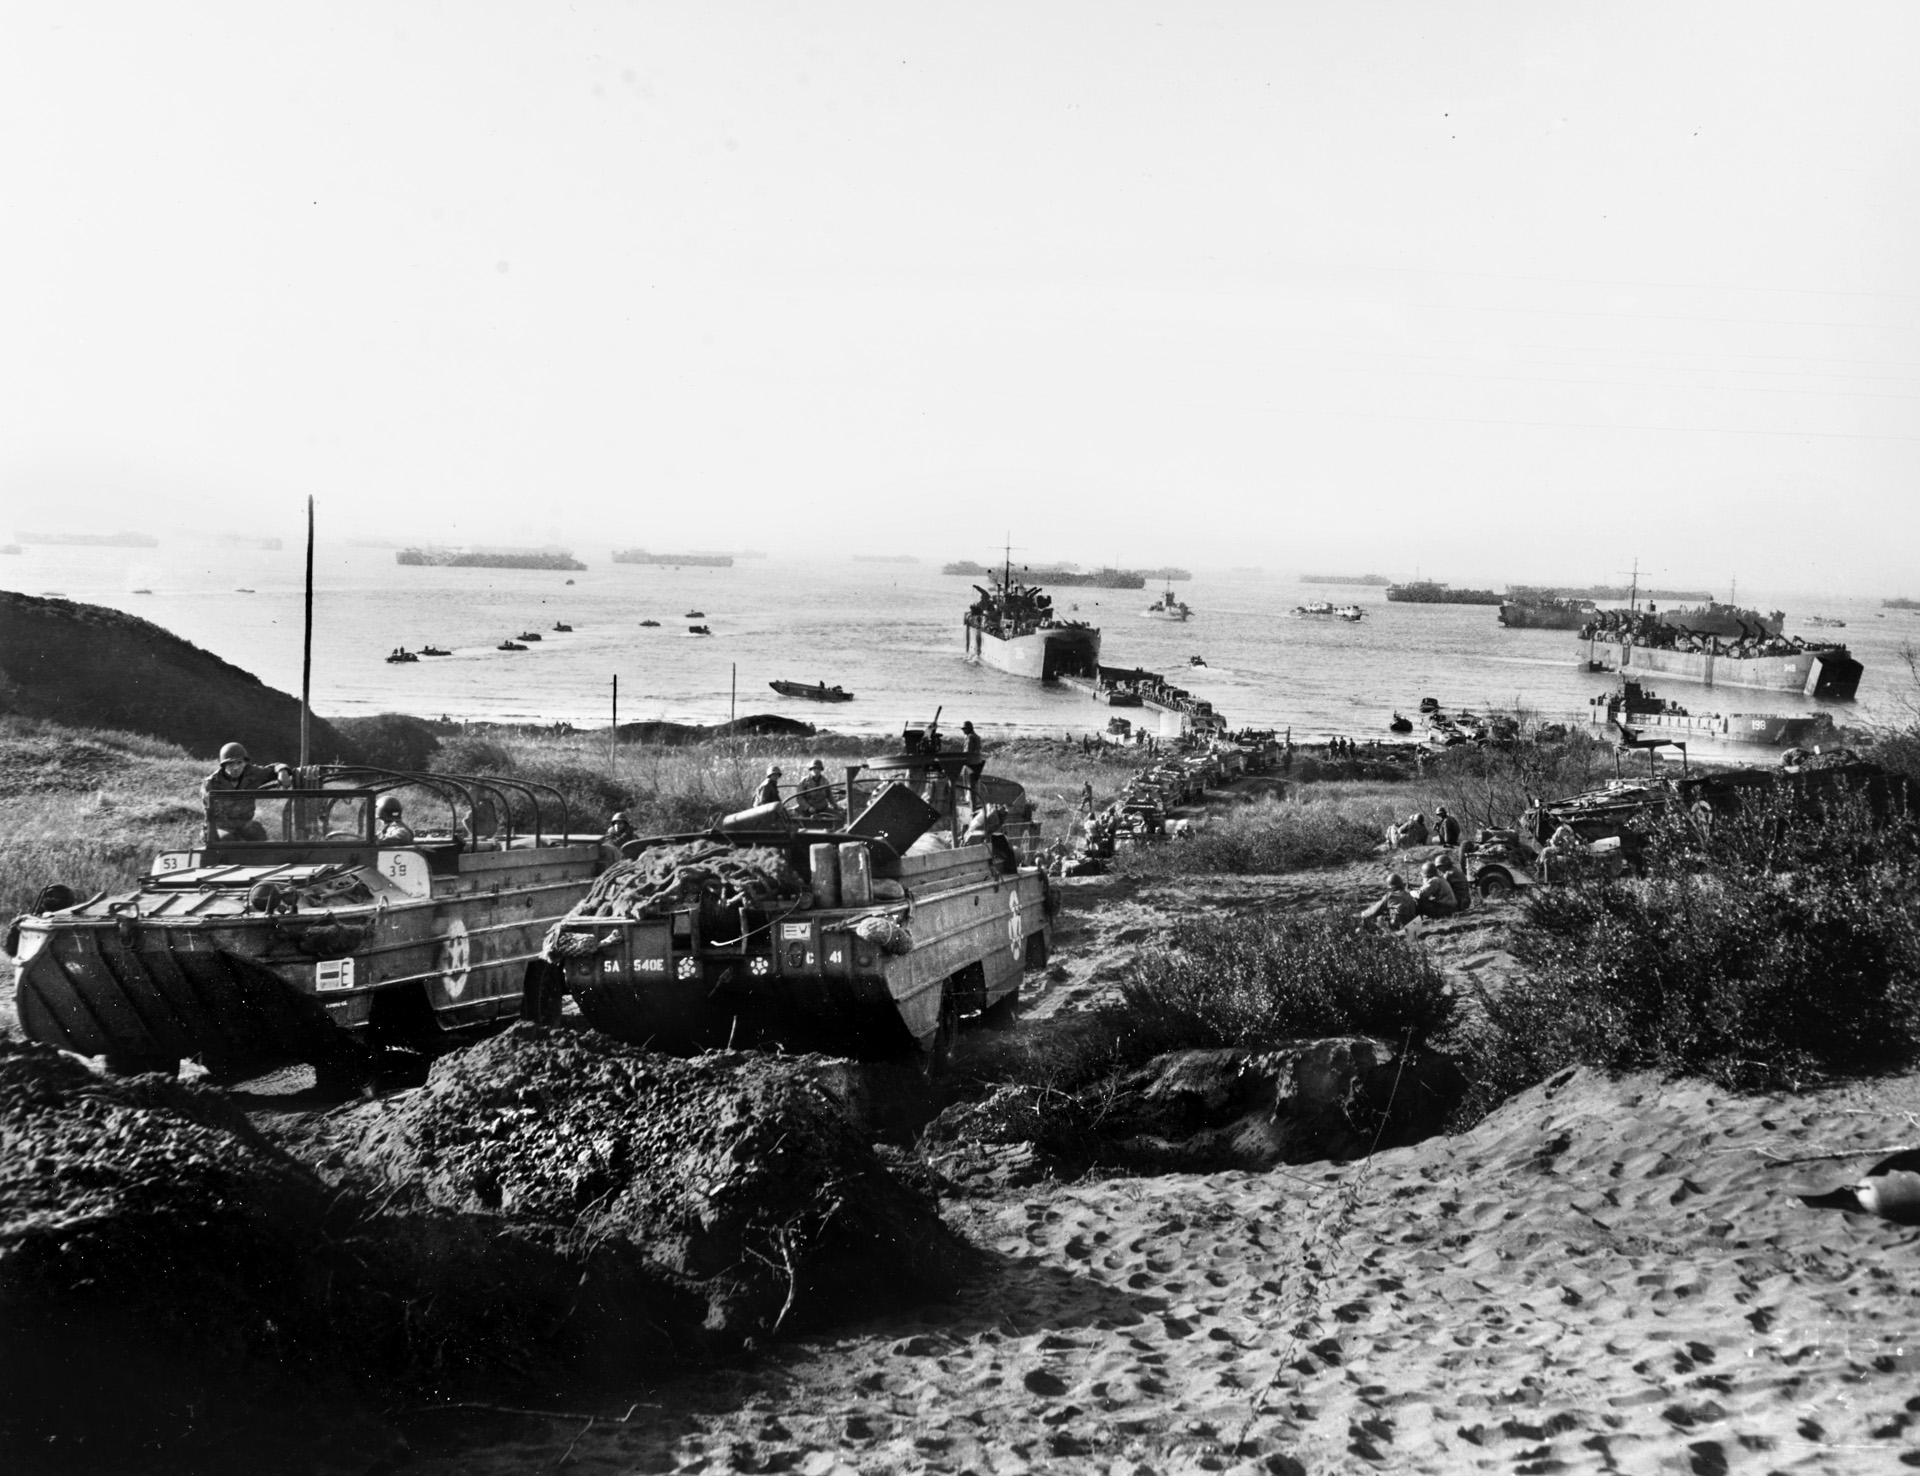 Allied forces achieved complete surprise when they stormed ashore 40 miles south of Rome on January 22, 1944, but they failed to exploit their advantage with a rapid advance inland.